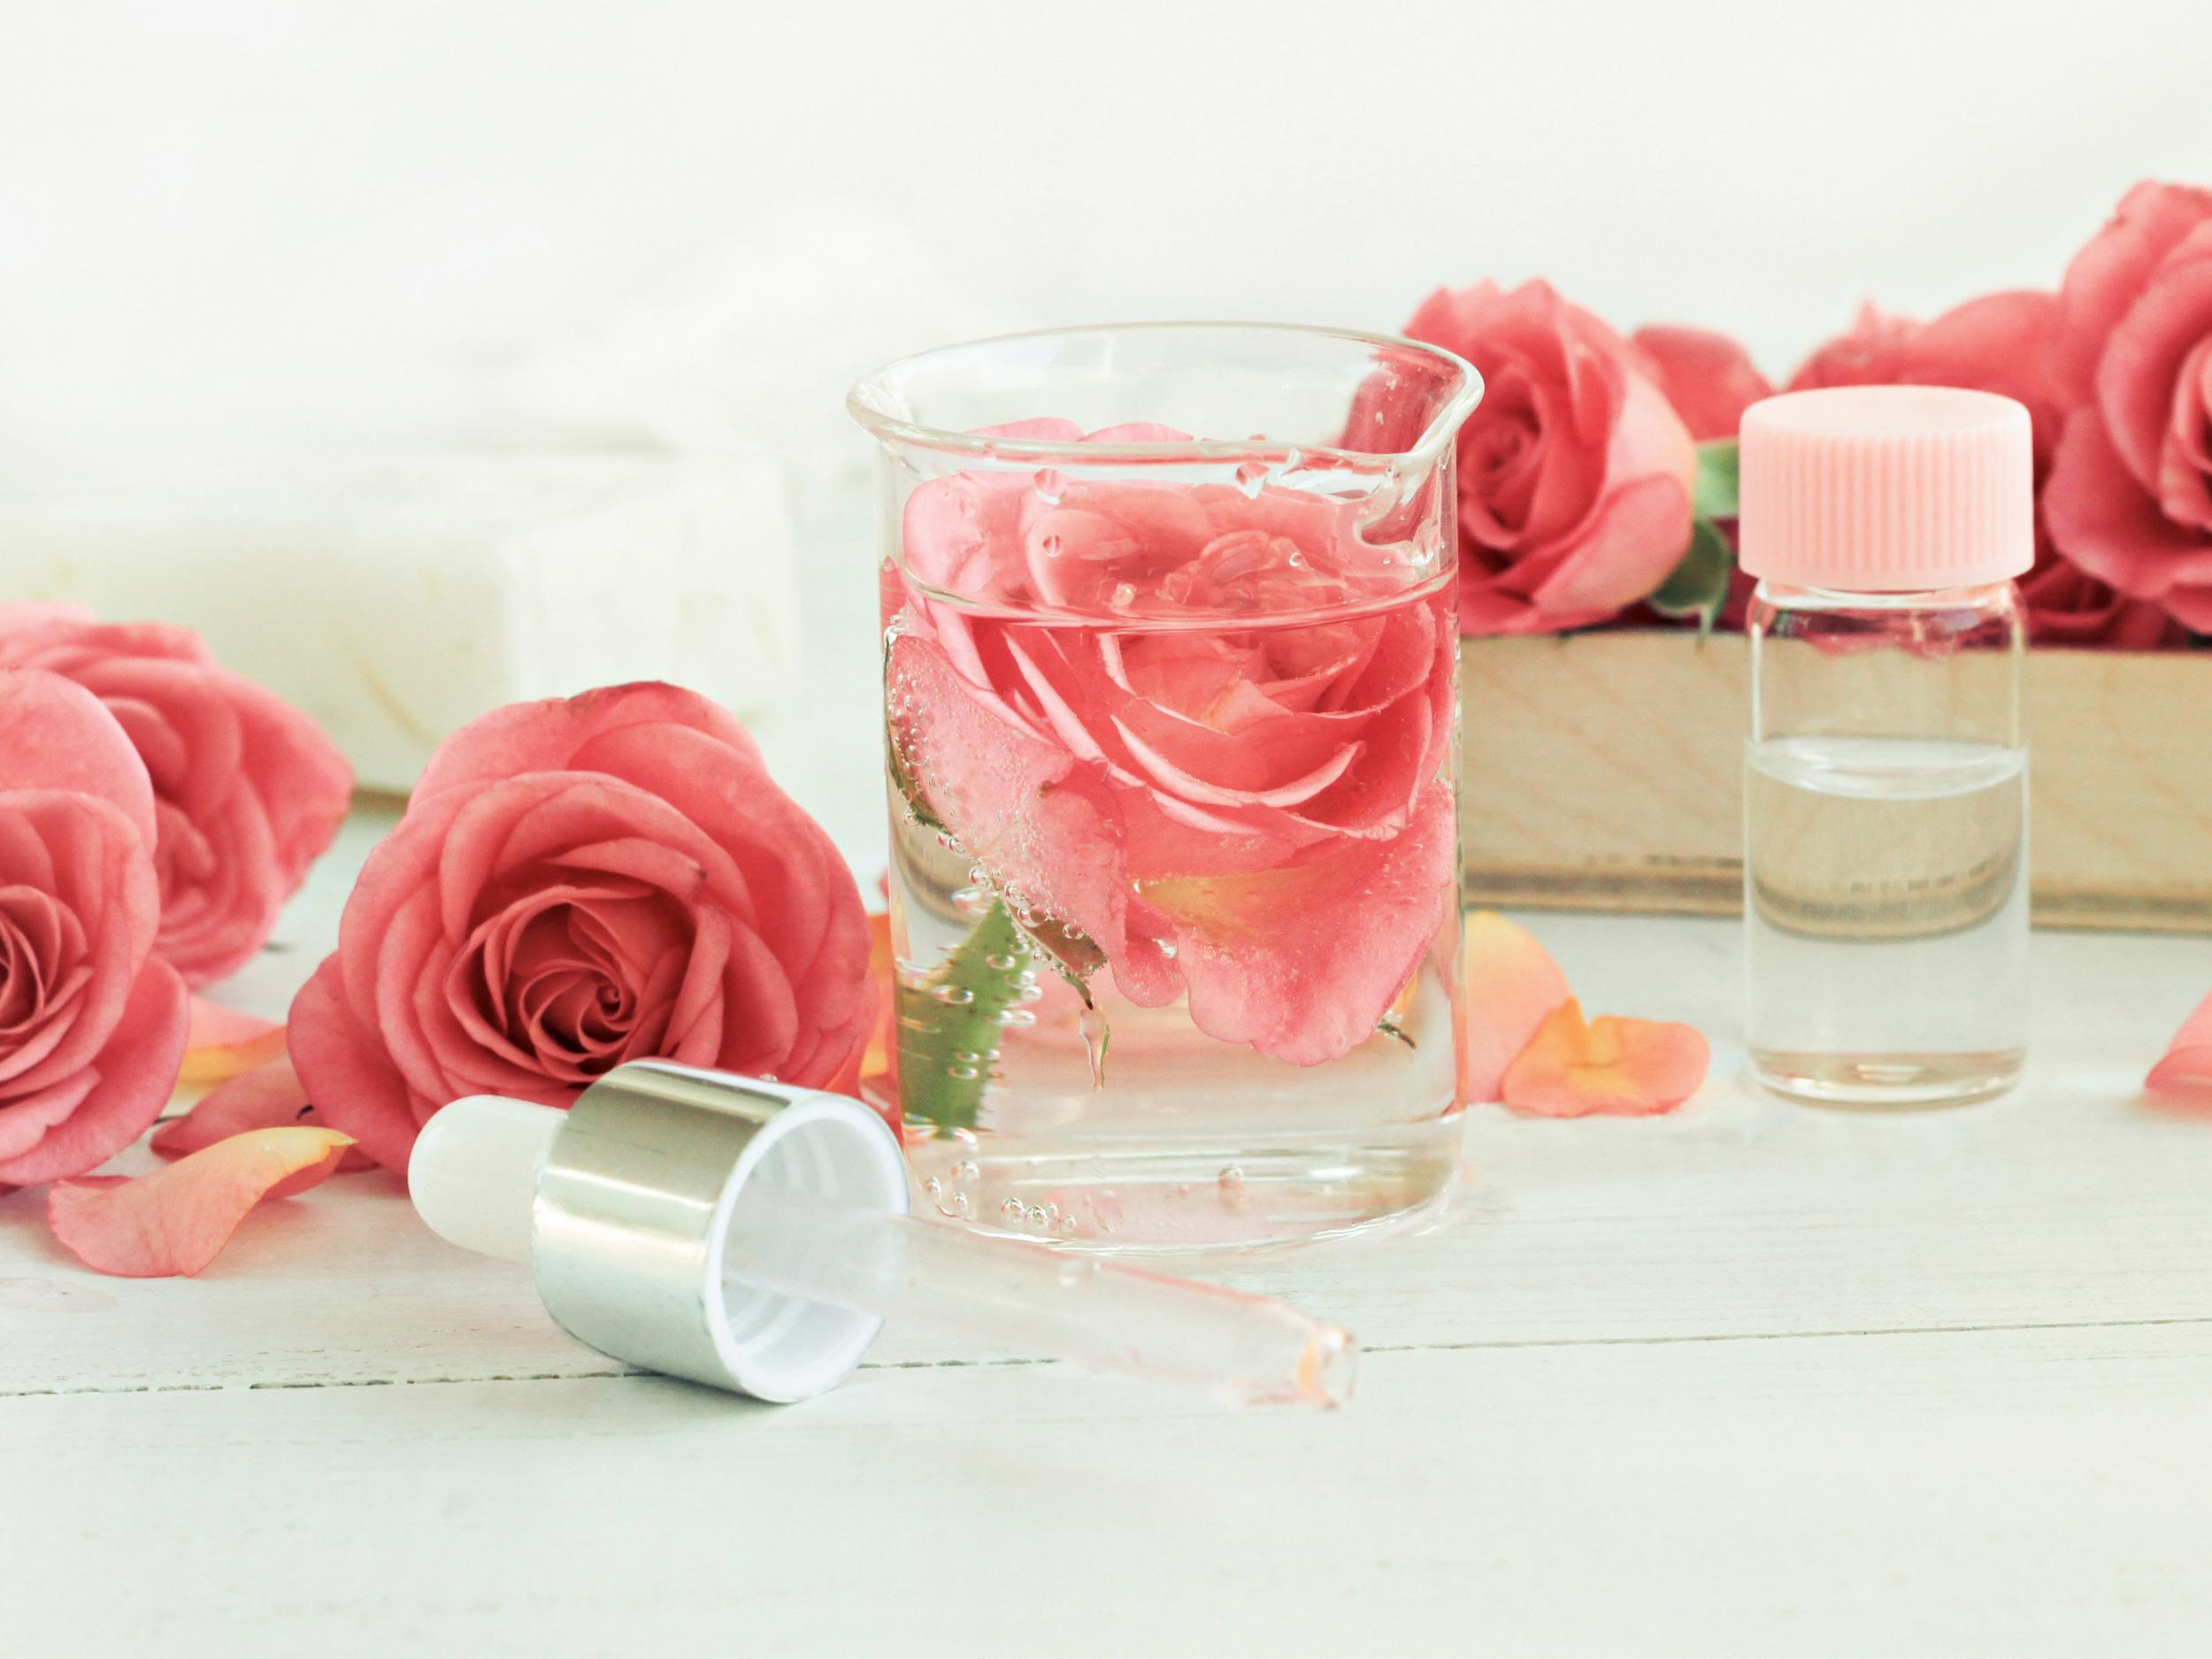 With the help of some online gurus, make your own rosewater